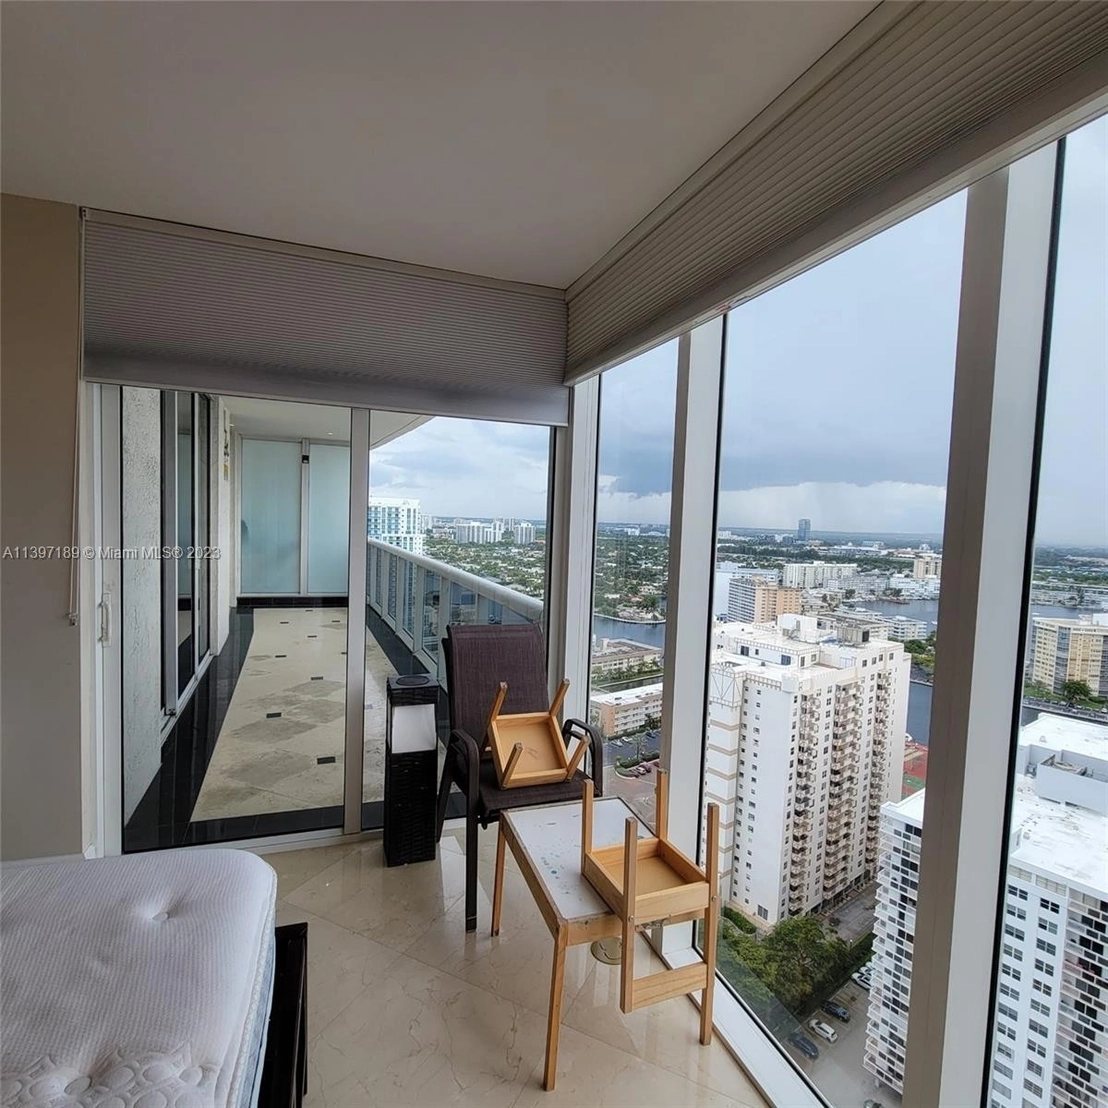 Photo of Unit 3007 at 1850 S Ocean Dr